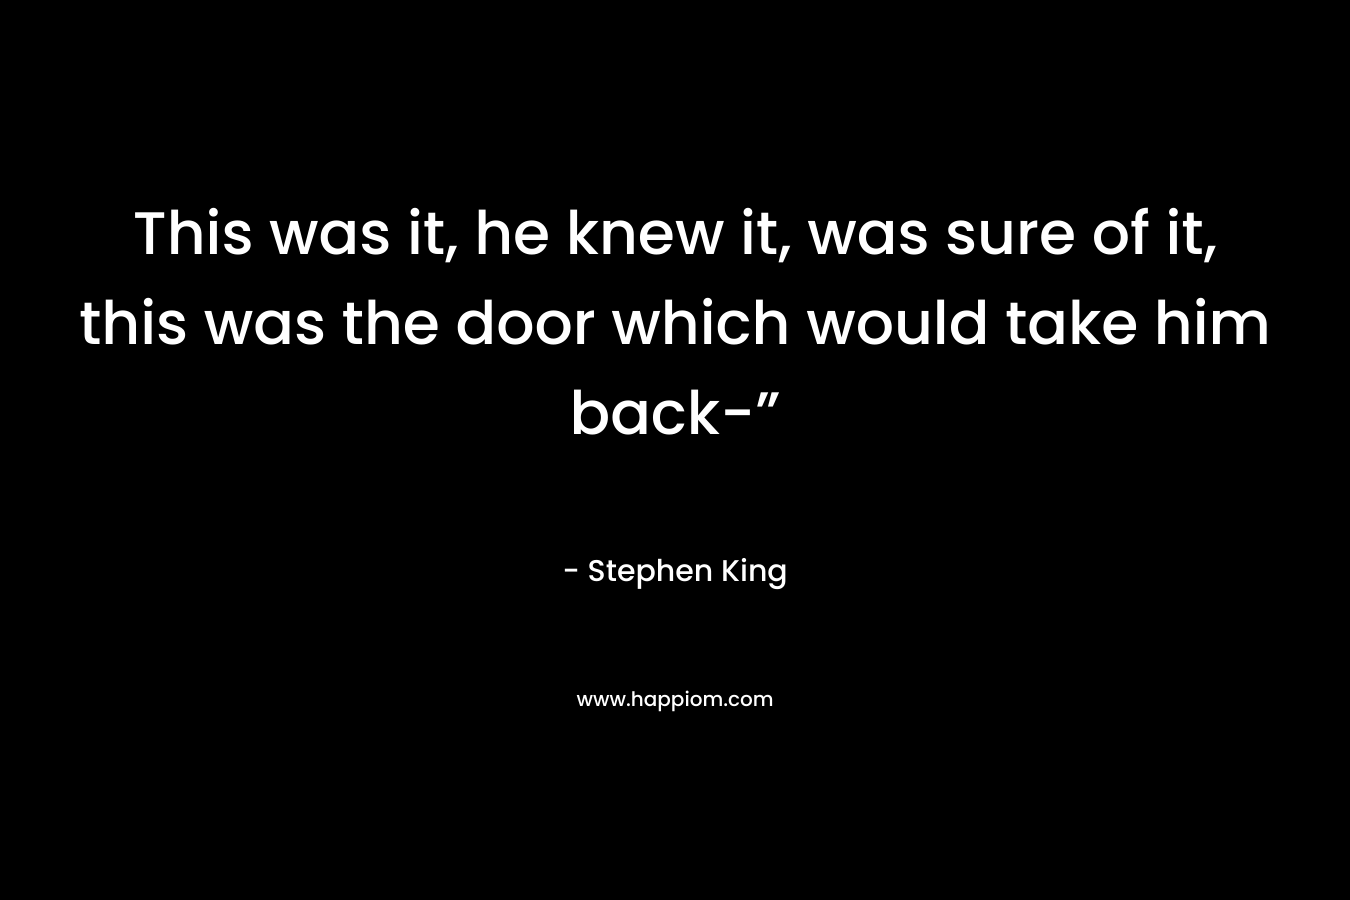 This was it, he knew it, was sure of it, this was the door which would take him back-”